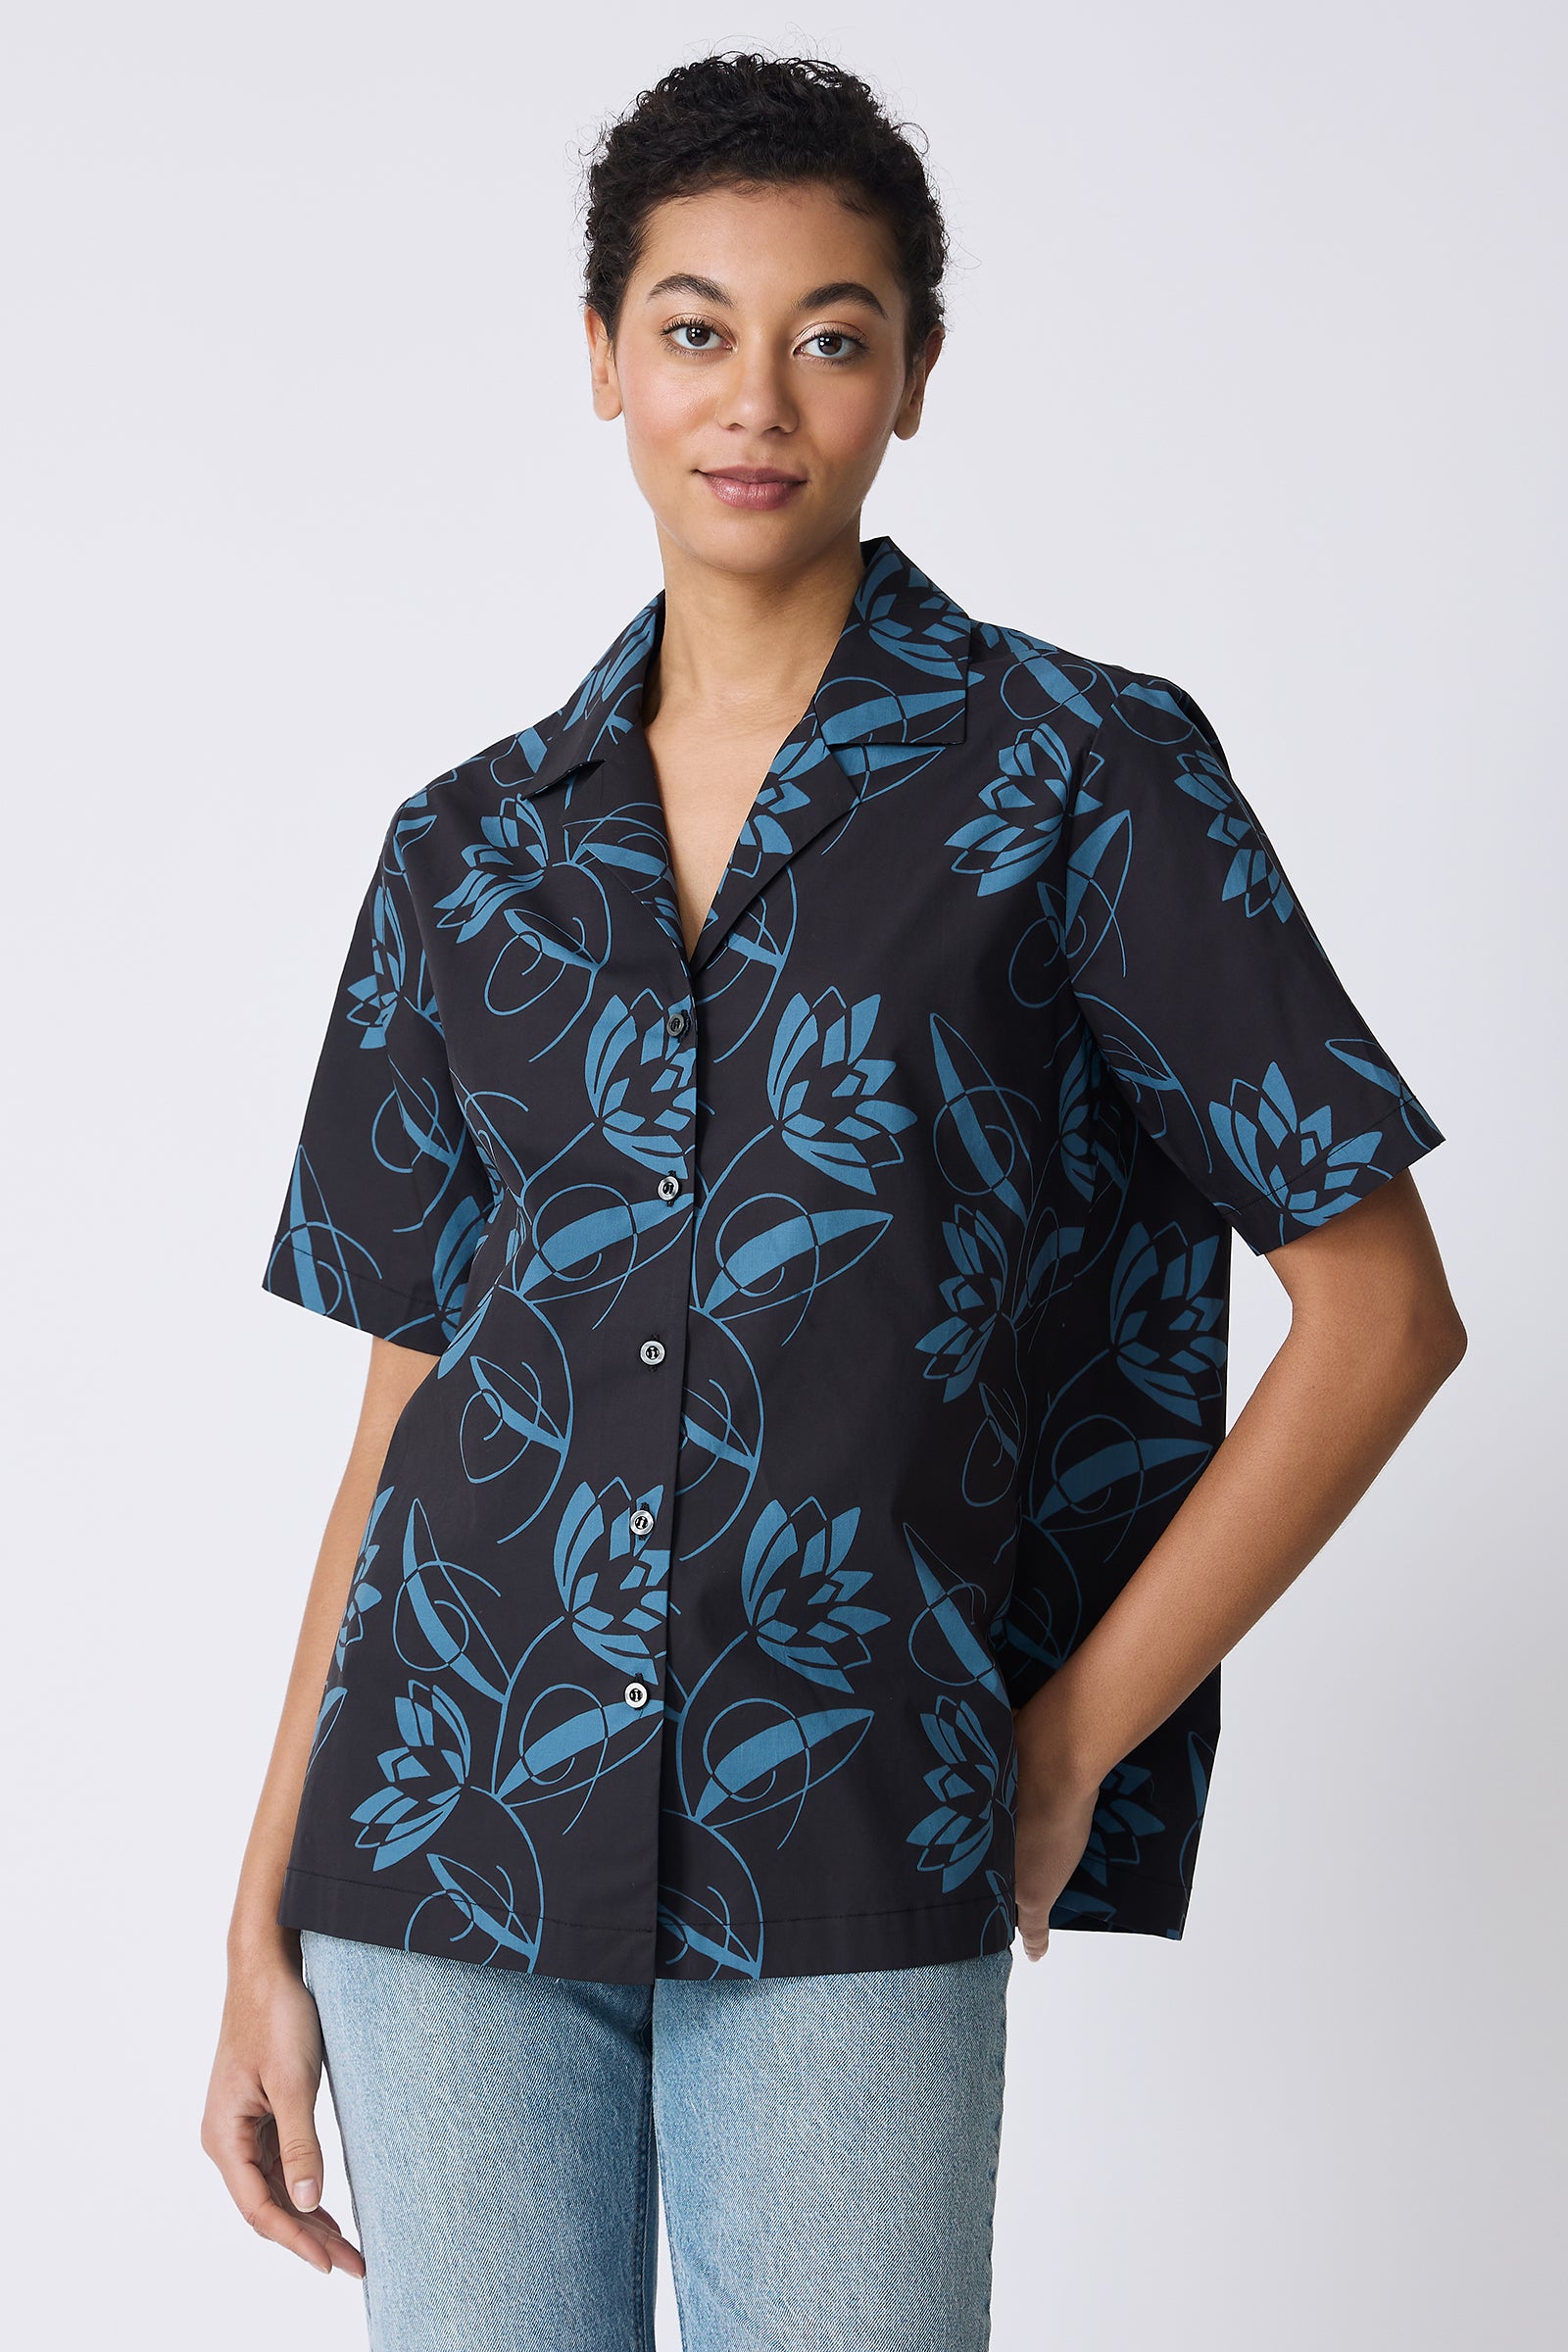 Kal Rieman Vacation Shirt in Lotus Print Blue on model with hand on hip front view